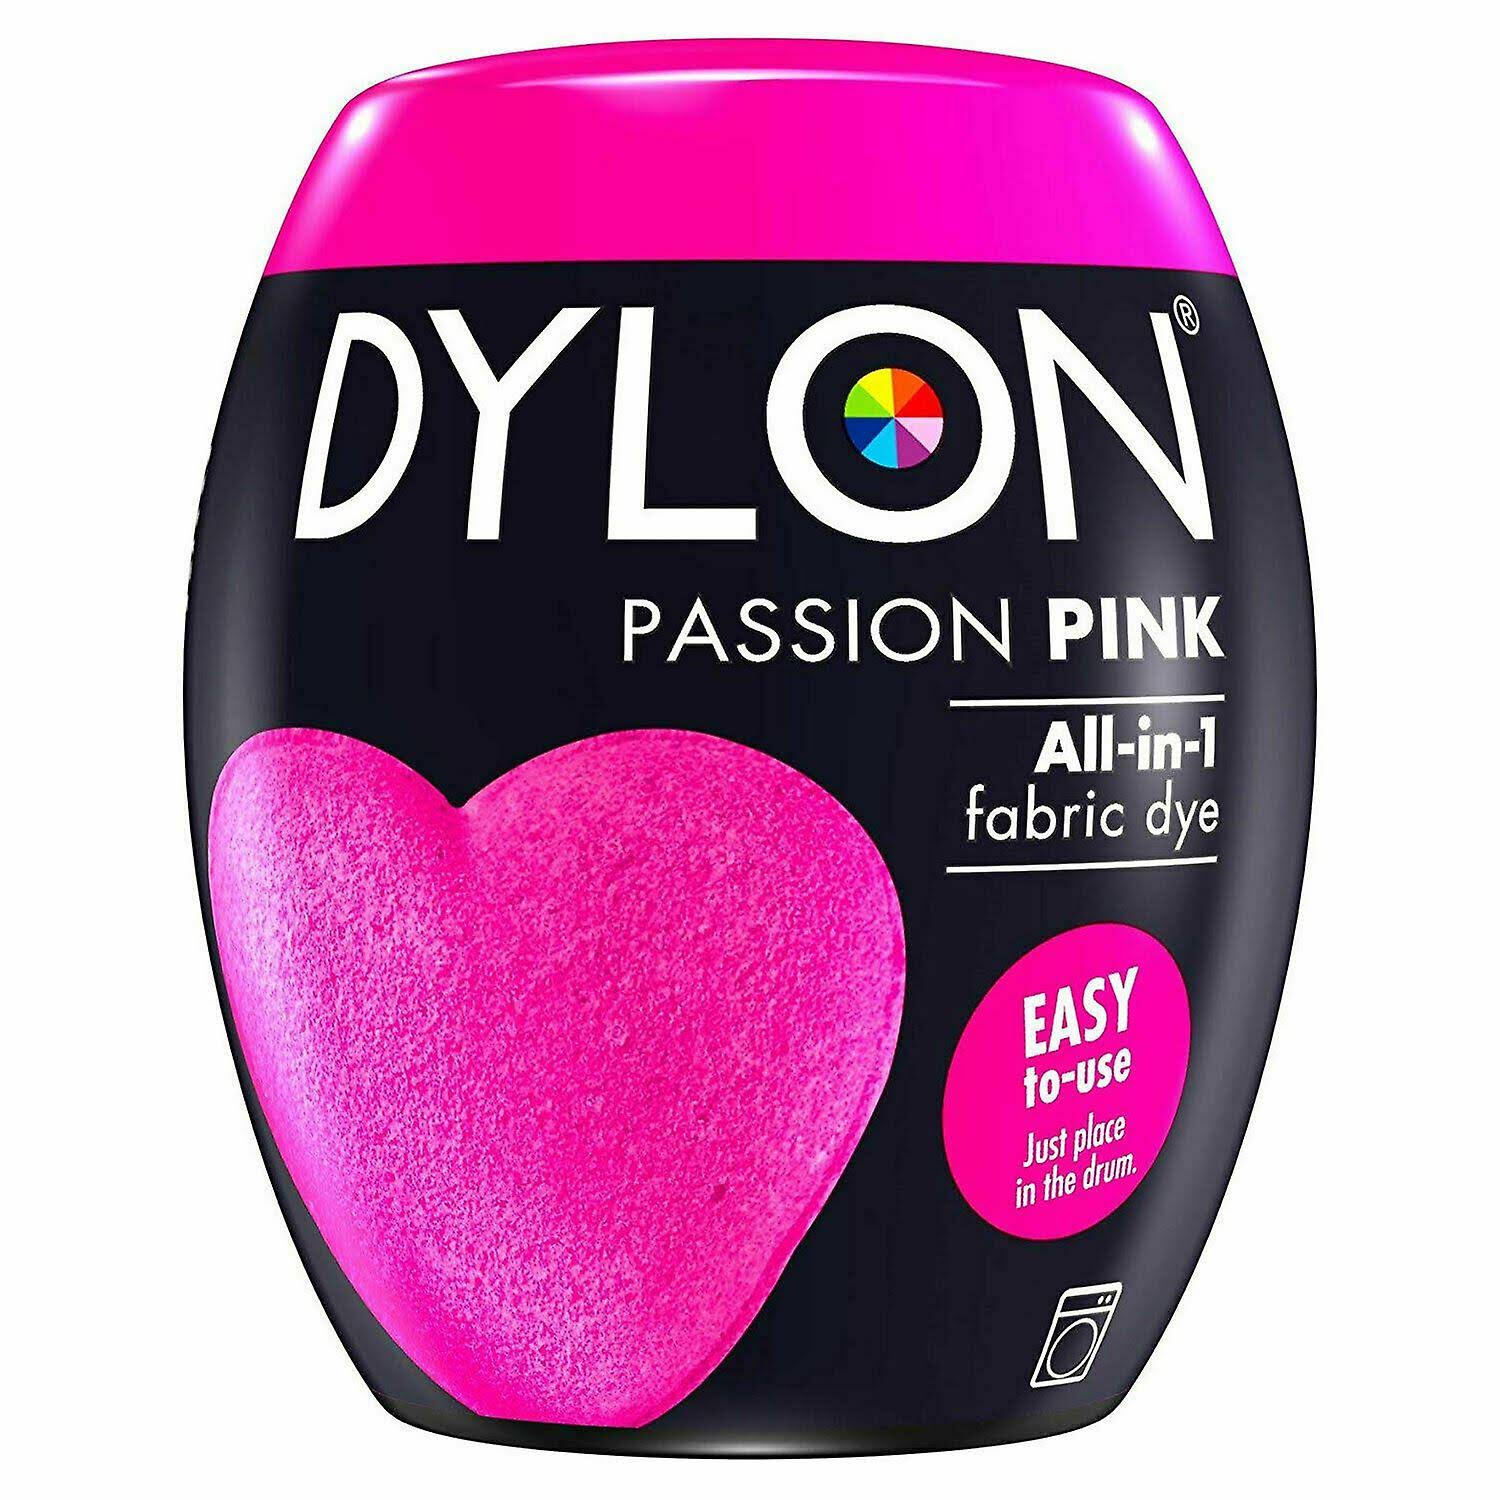 Dylon All-in-1 Fabric Dye - 350g, Passion Pink